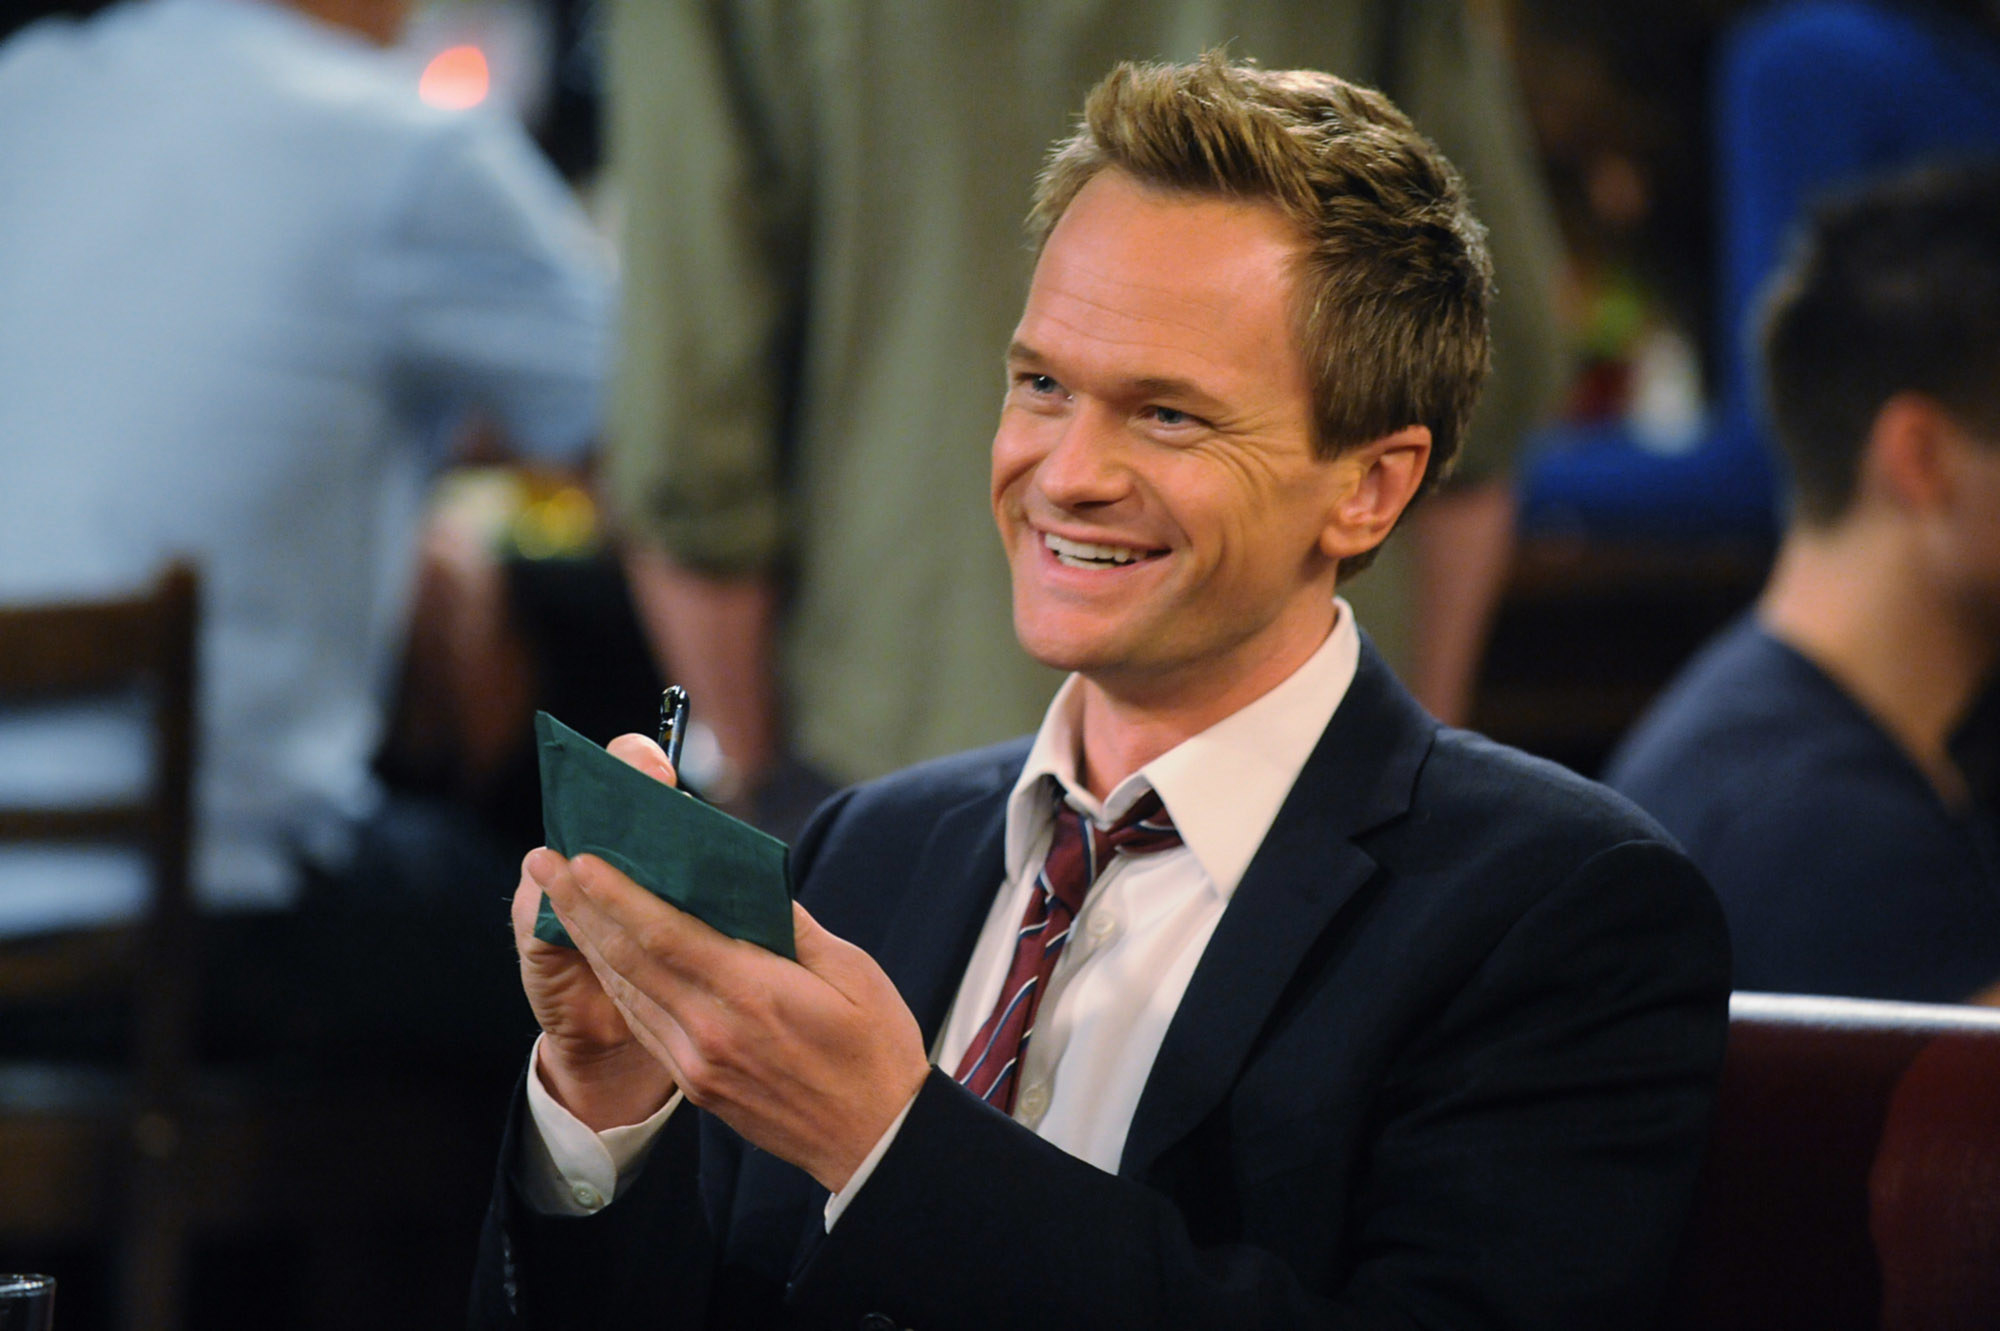 Neil Patrick Harris as Barney taking notes on a cocktail napkin